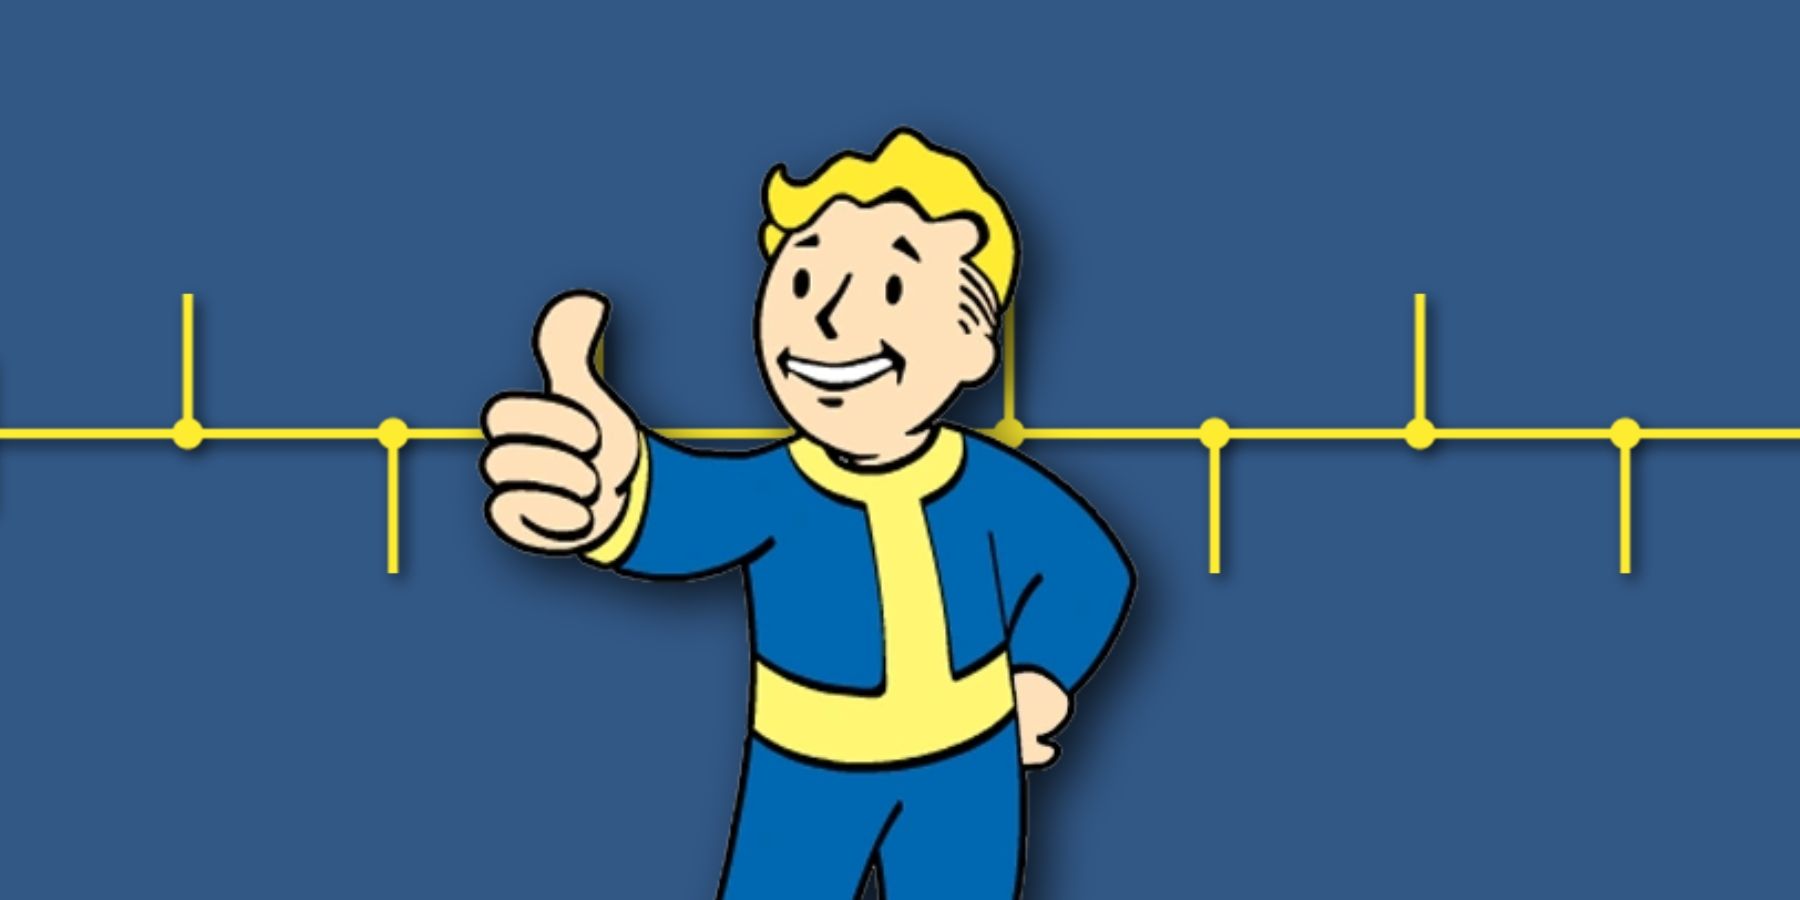 Vault Boy from Fallout sticking his thumb up with a timeline in the background